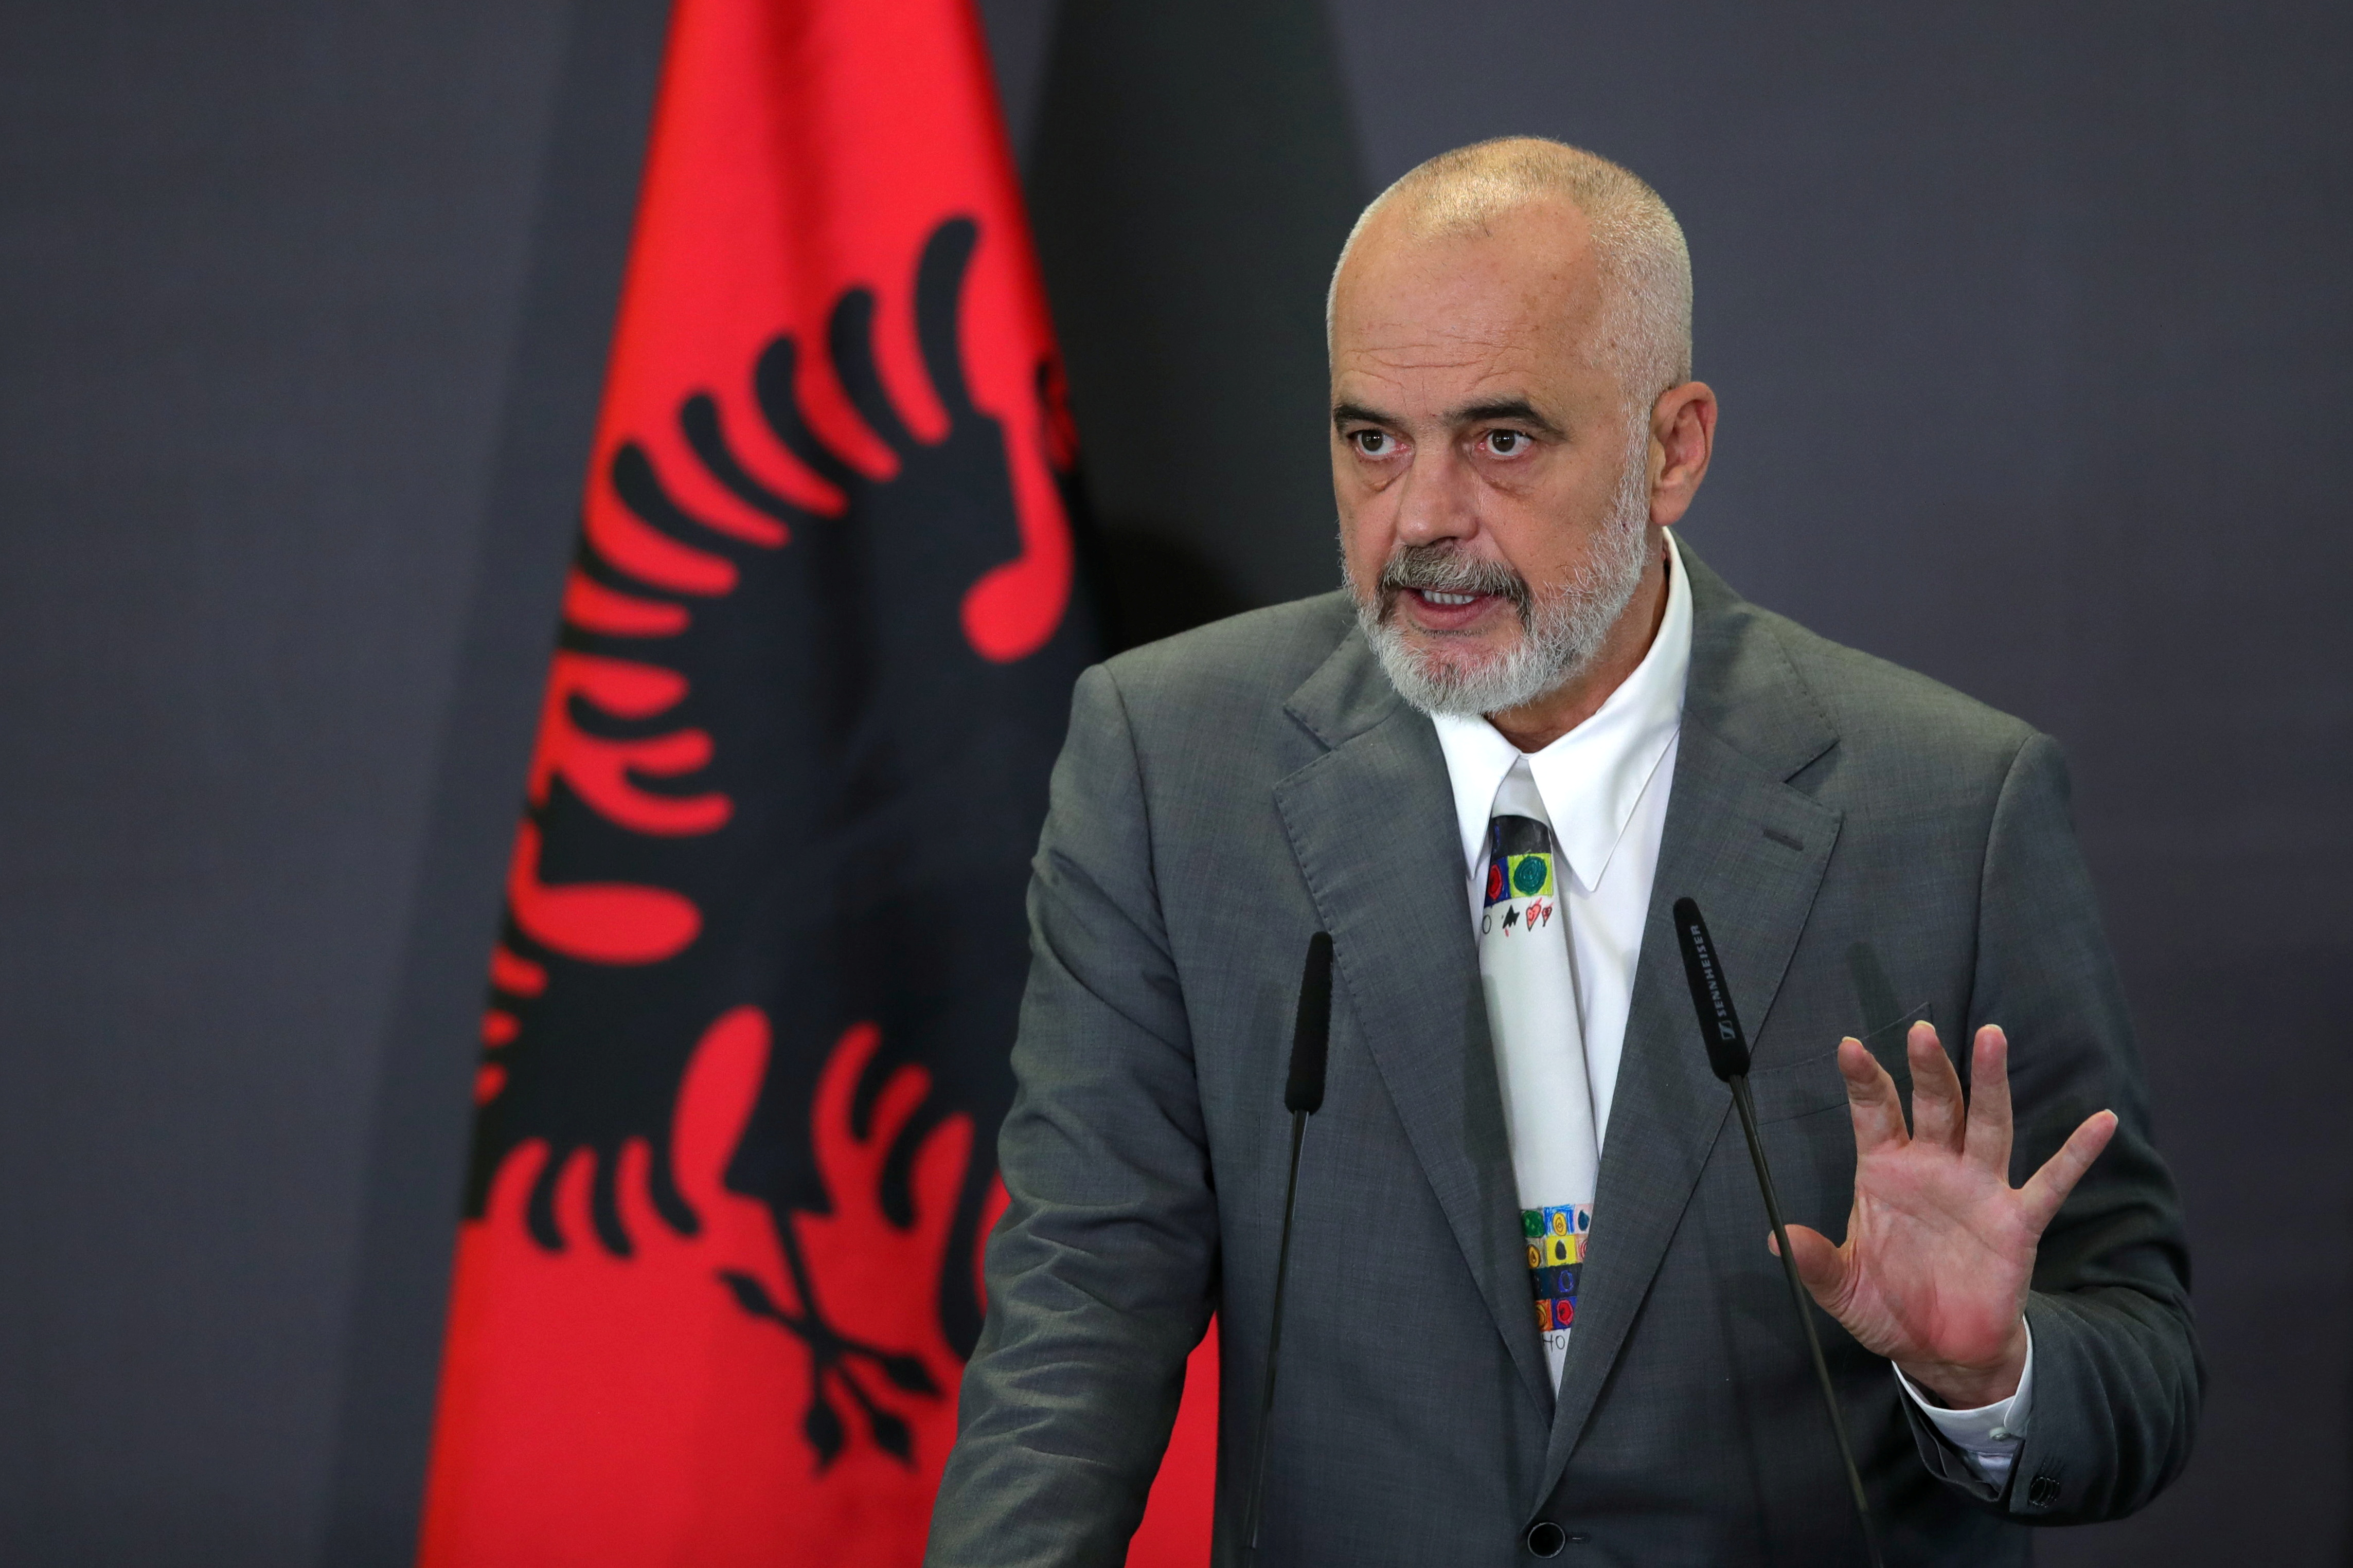 Albanian Prime Minister Edi Rama gestures during a news conference at Tirana Business Park, in Tirana